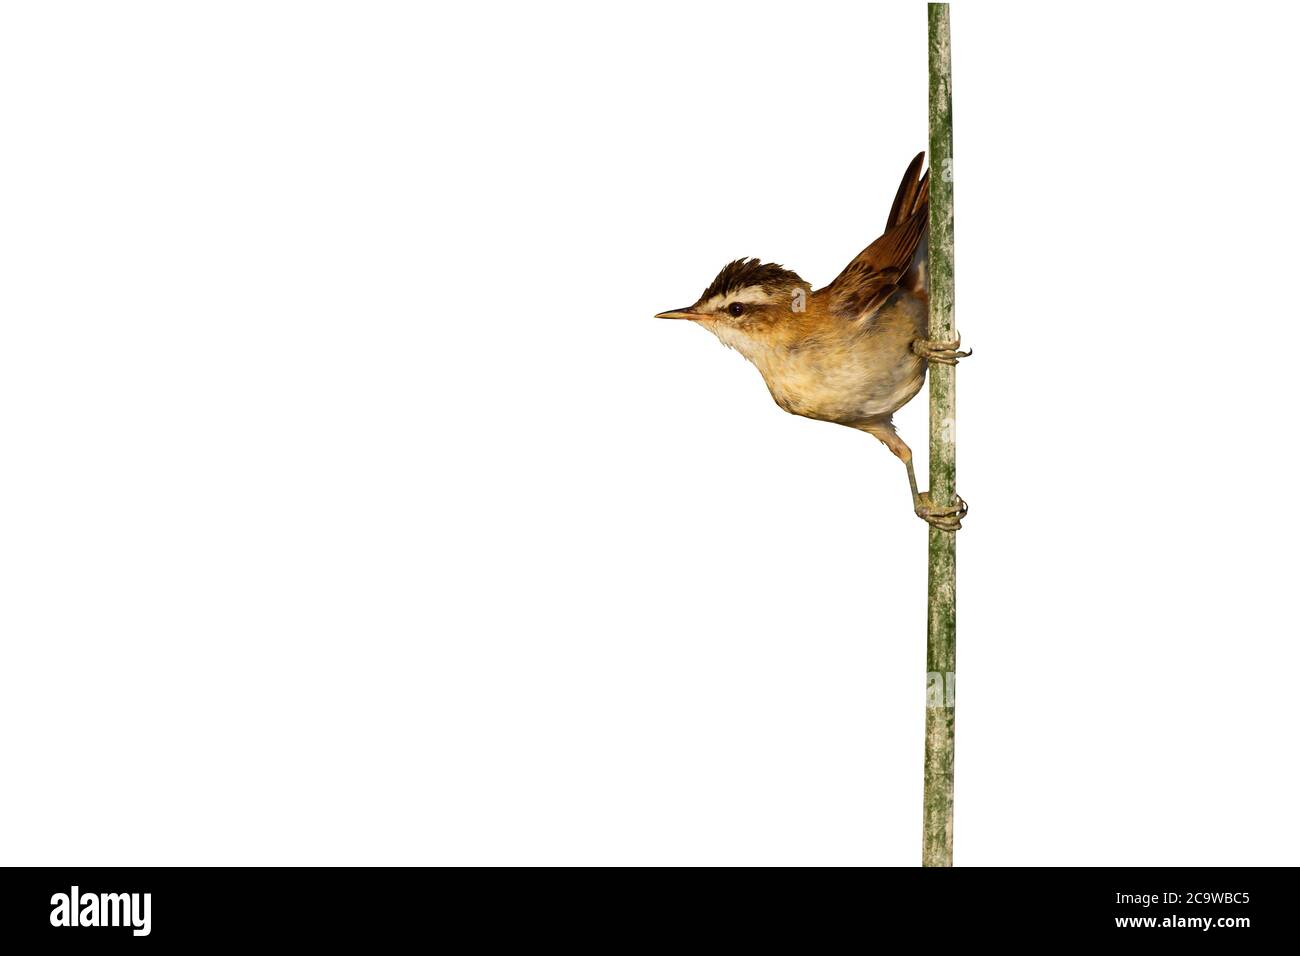 Cute little bird. Isolated bird and branch. White background. Moustached Warbler. Stock Photo